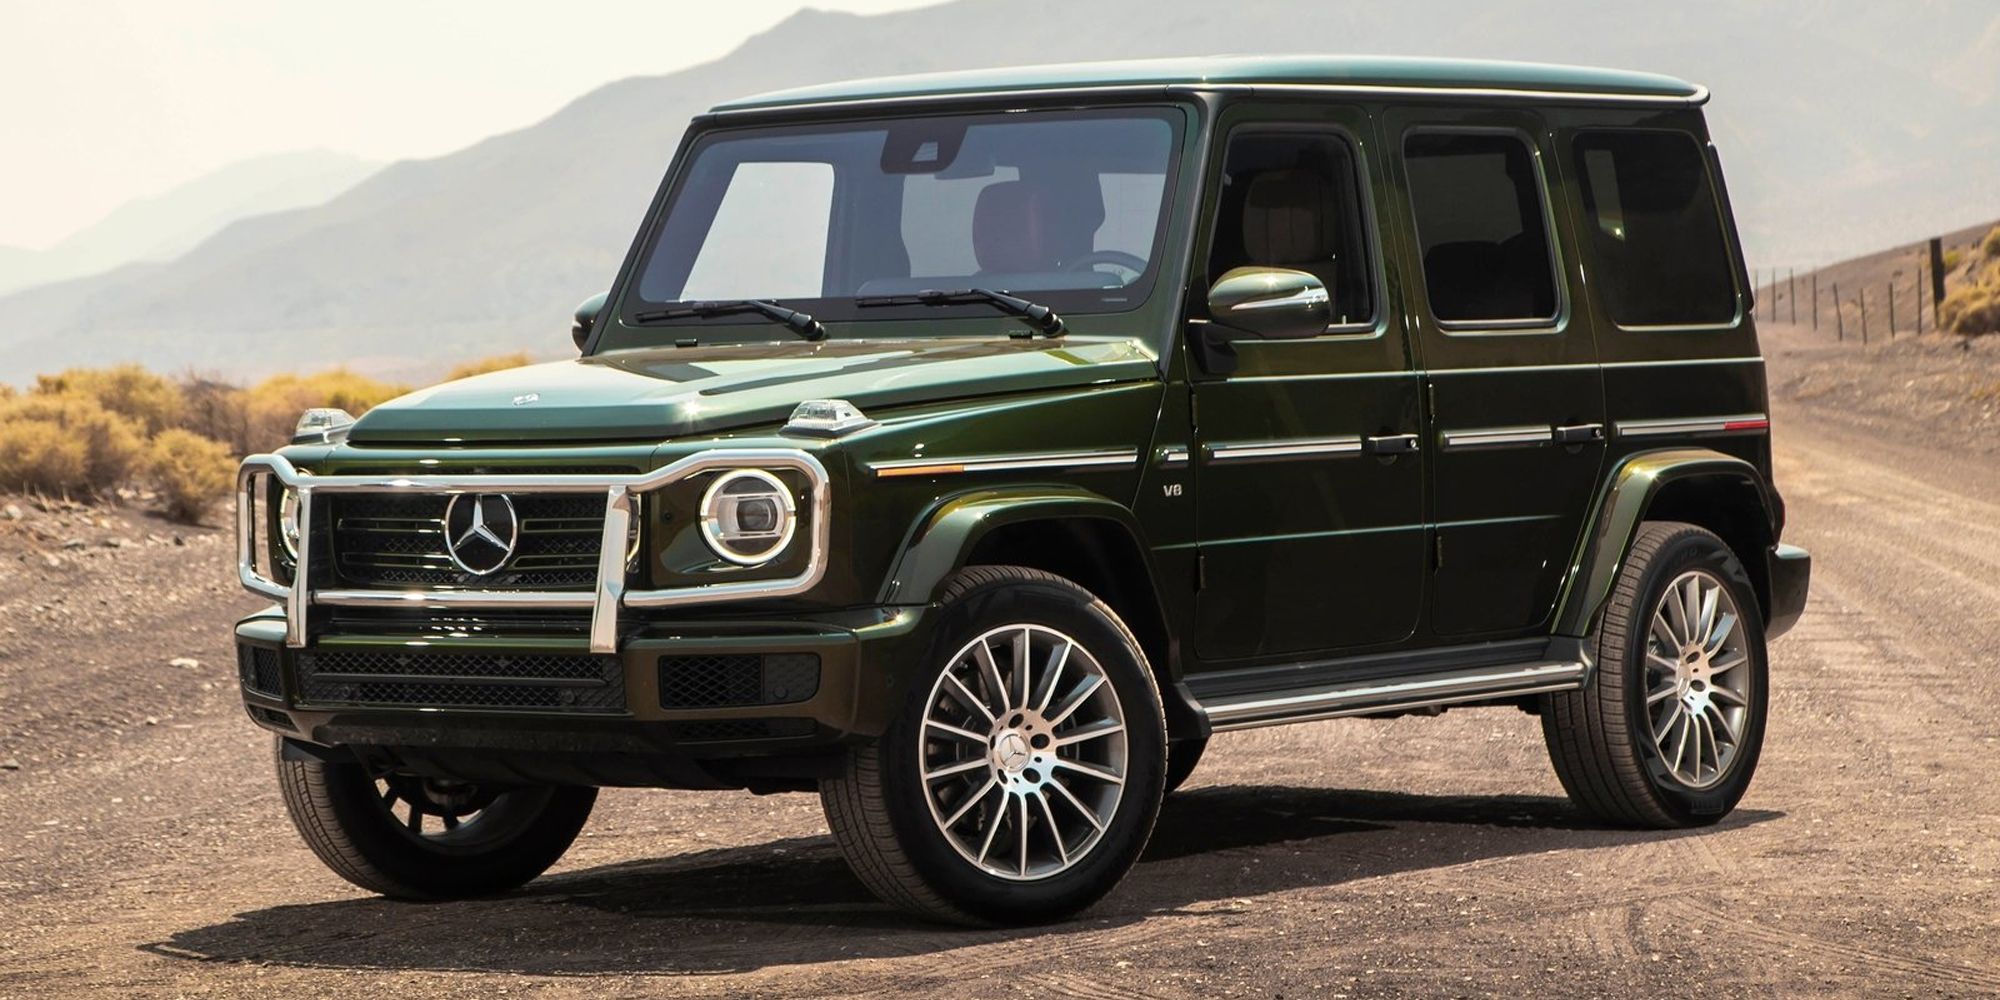 The front of the 2019 G-Wagen